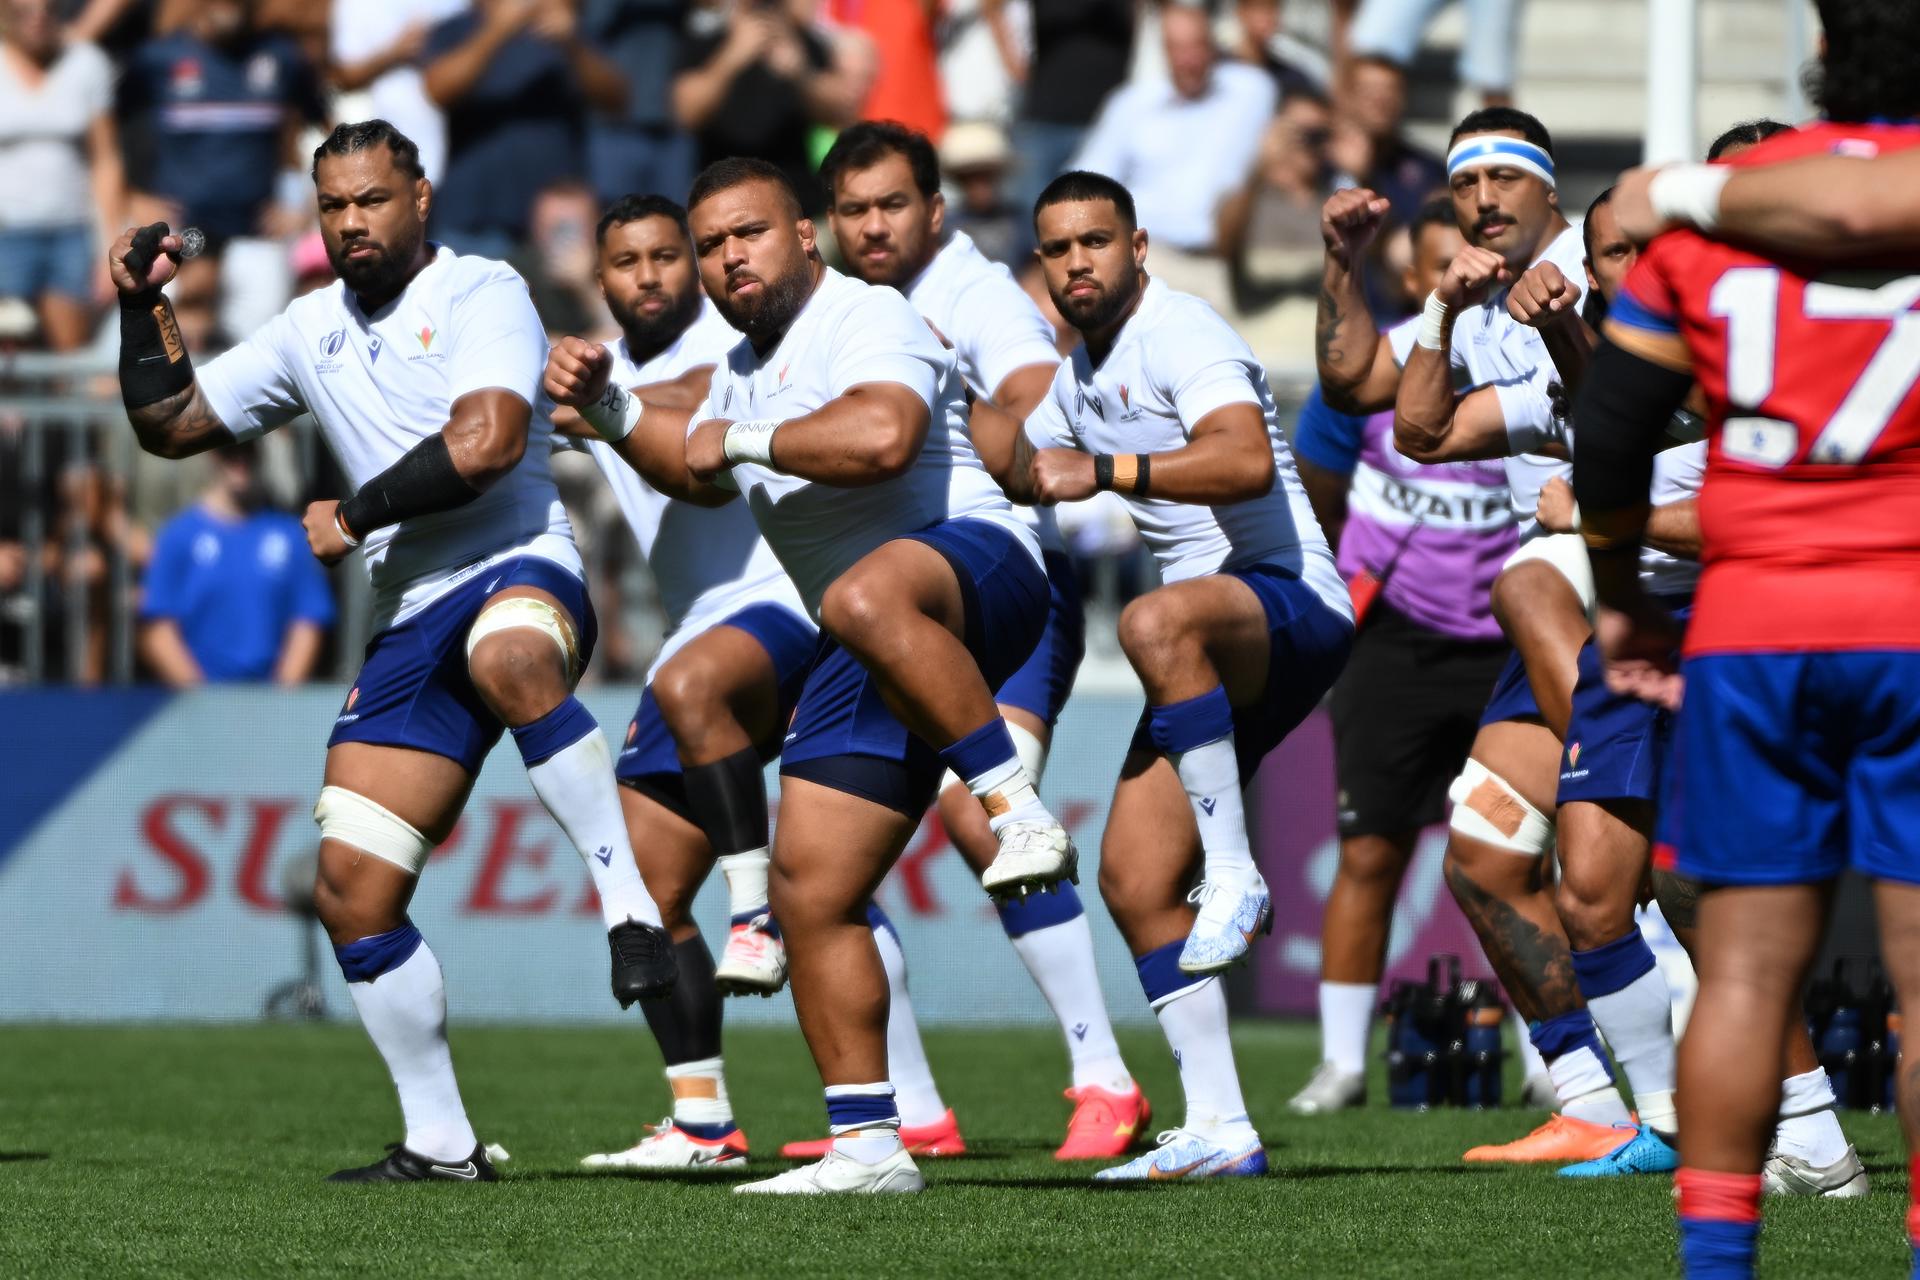 Samoan players perform the Siva Tau challenge before the Rugby World Cup Pool D match between Samoa and Chile in Bordeaux, France, 16 September 2023. EFE-EPA/Caroline Blumberg